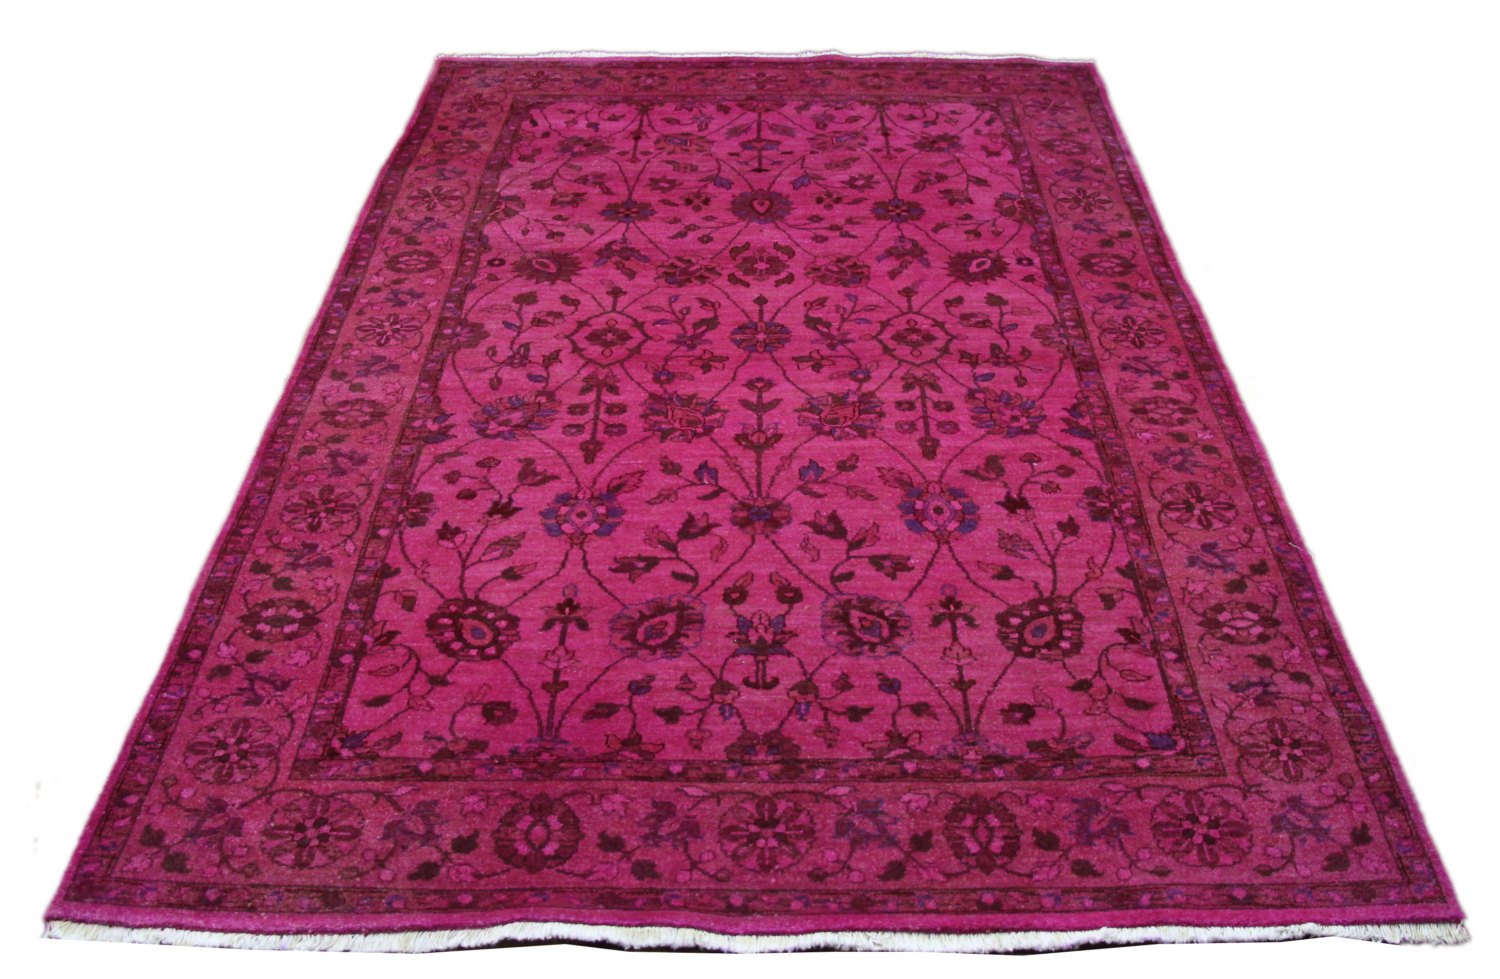 Fuchsia Hot Pink 6x9 Overdyed Floral Vine Rug 2783